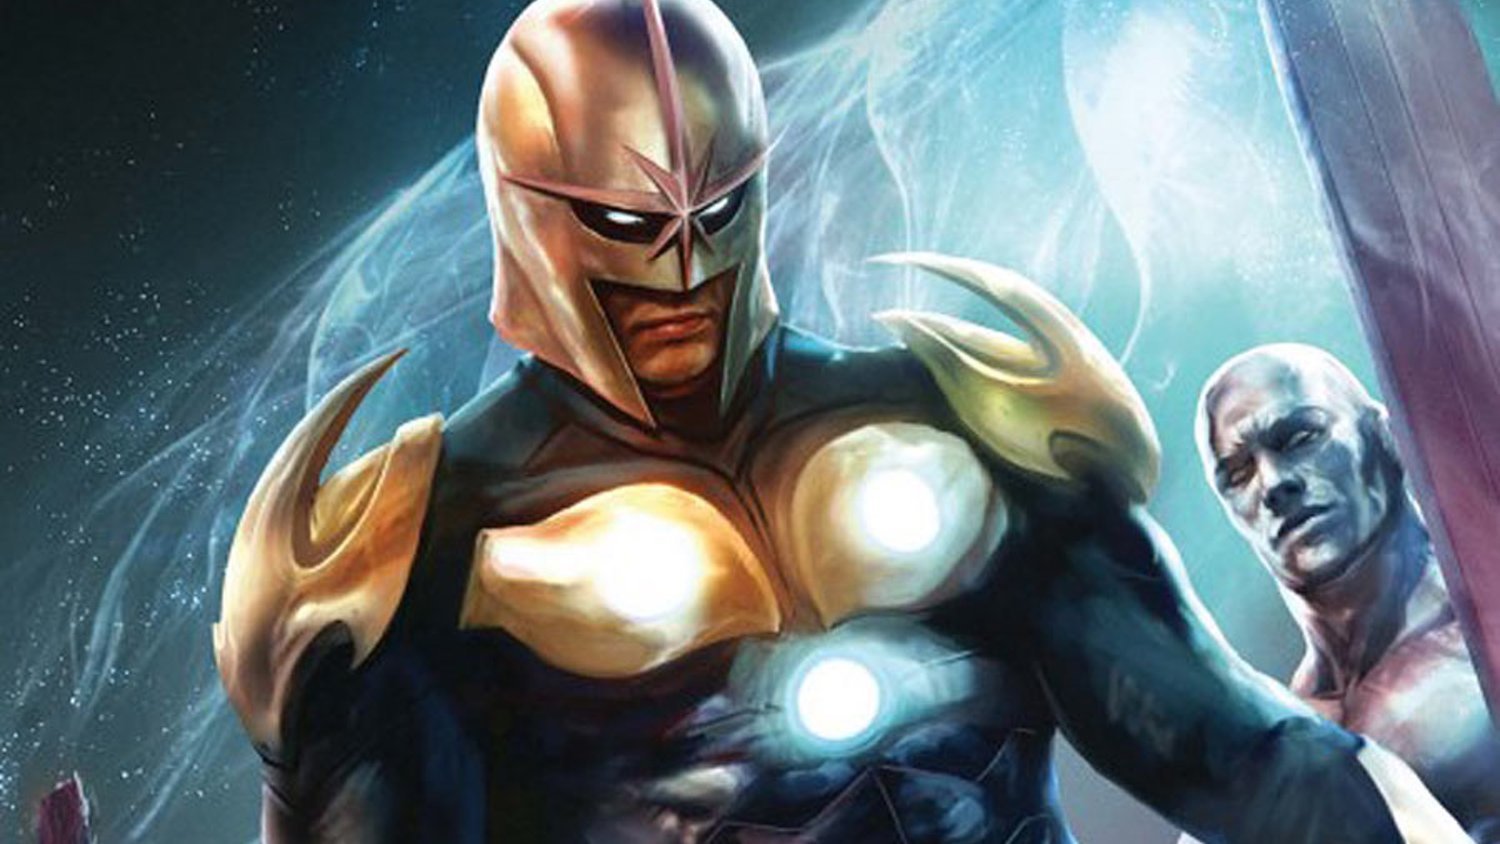 Nova Project Being Developed For Marvel Studios With Moon Knight Writer Sabir Pirzada